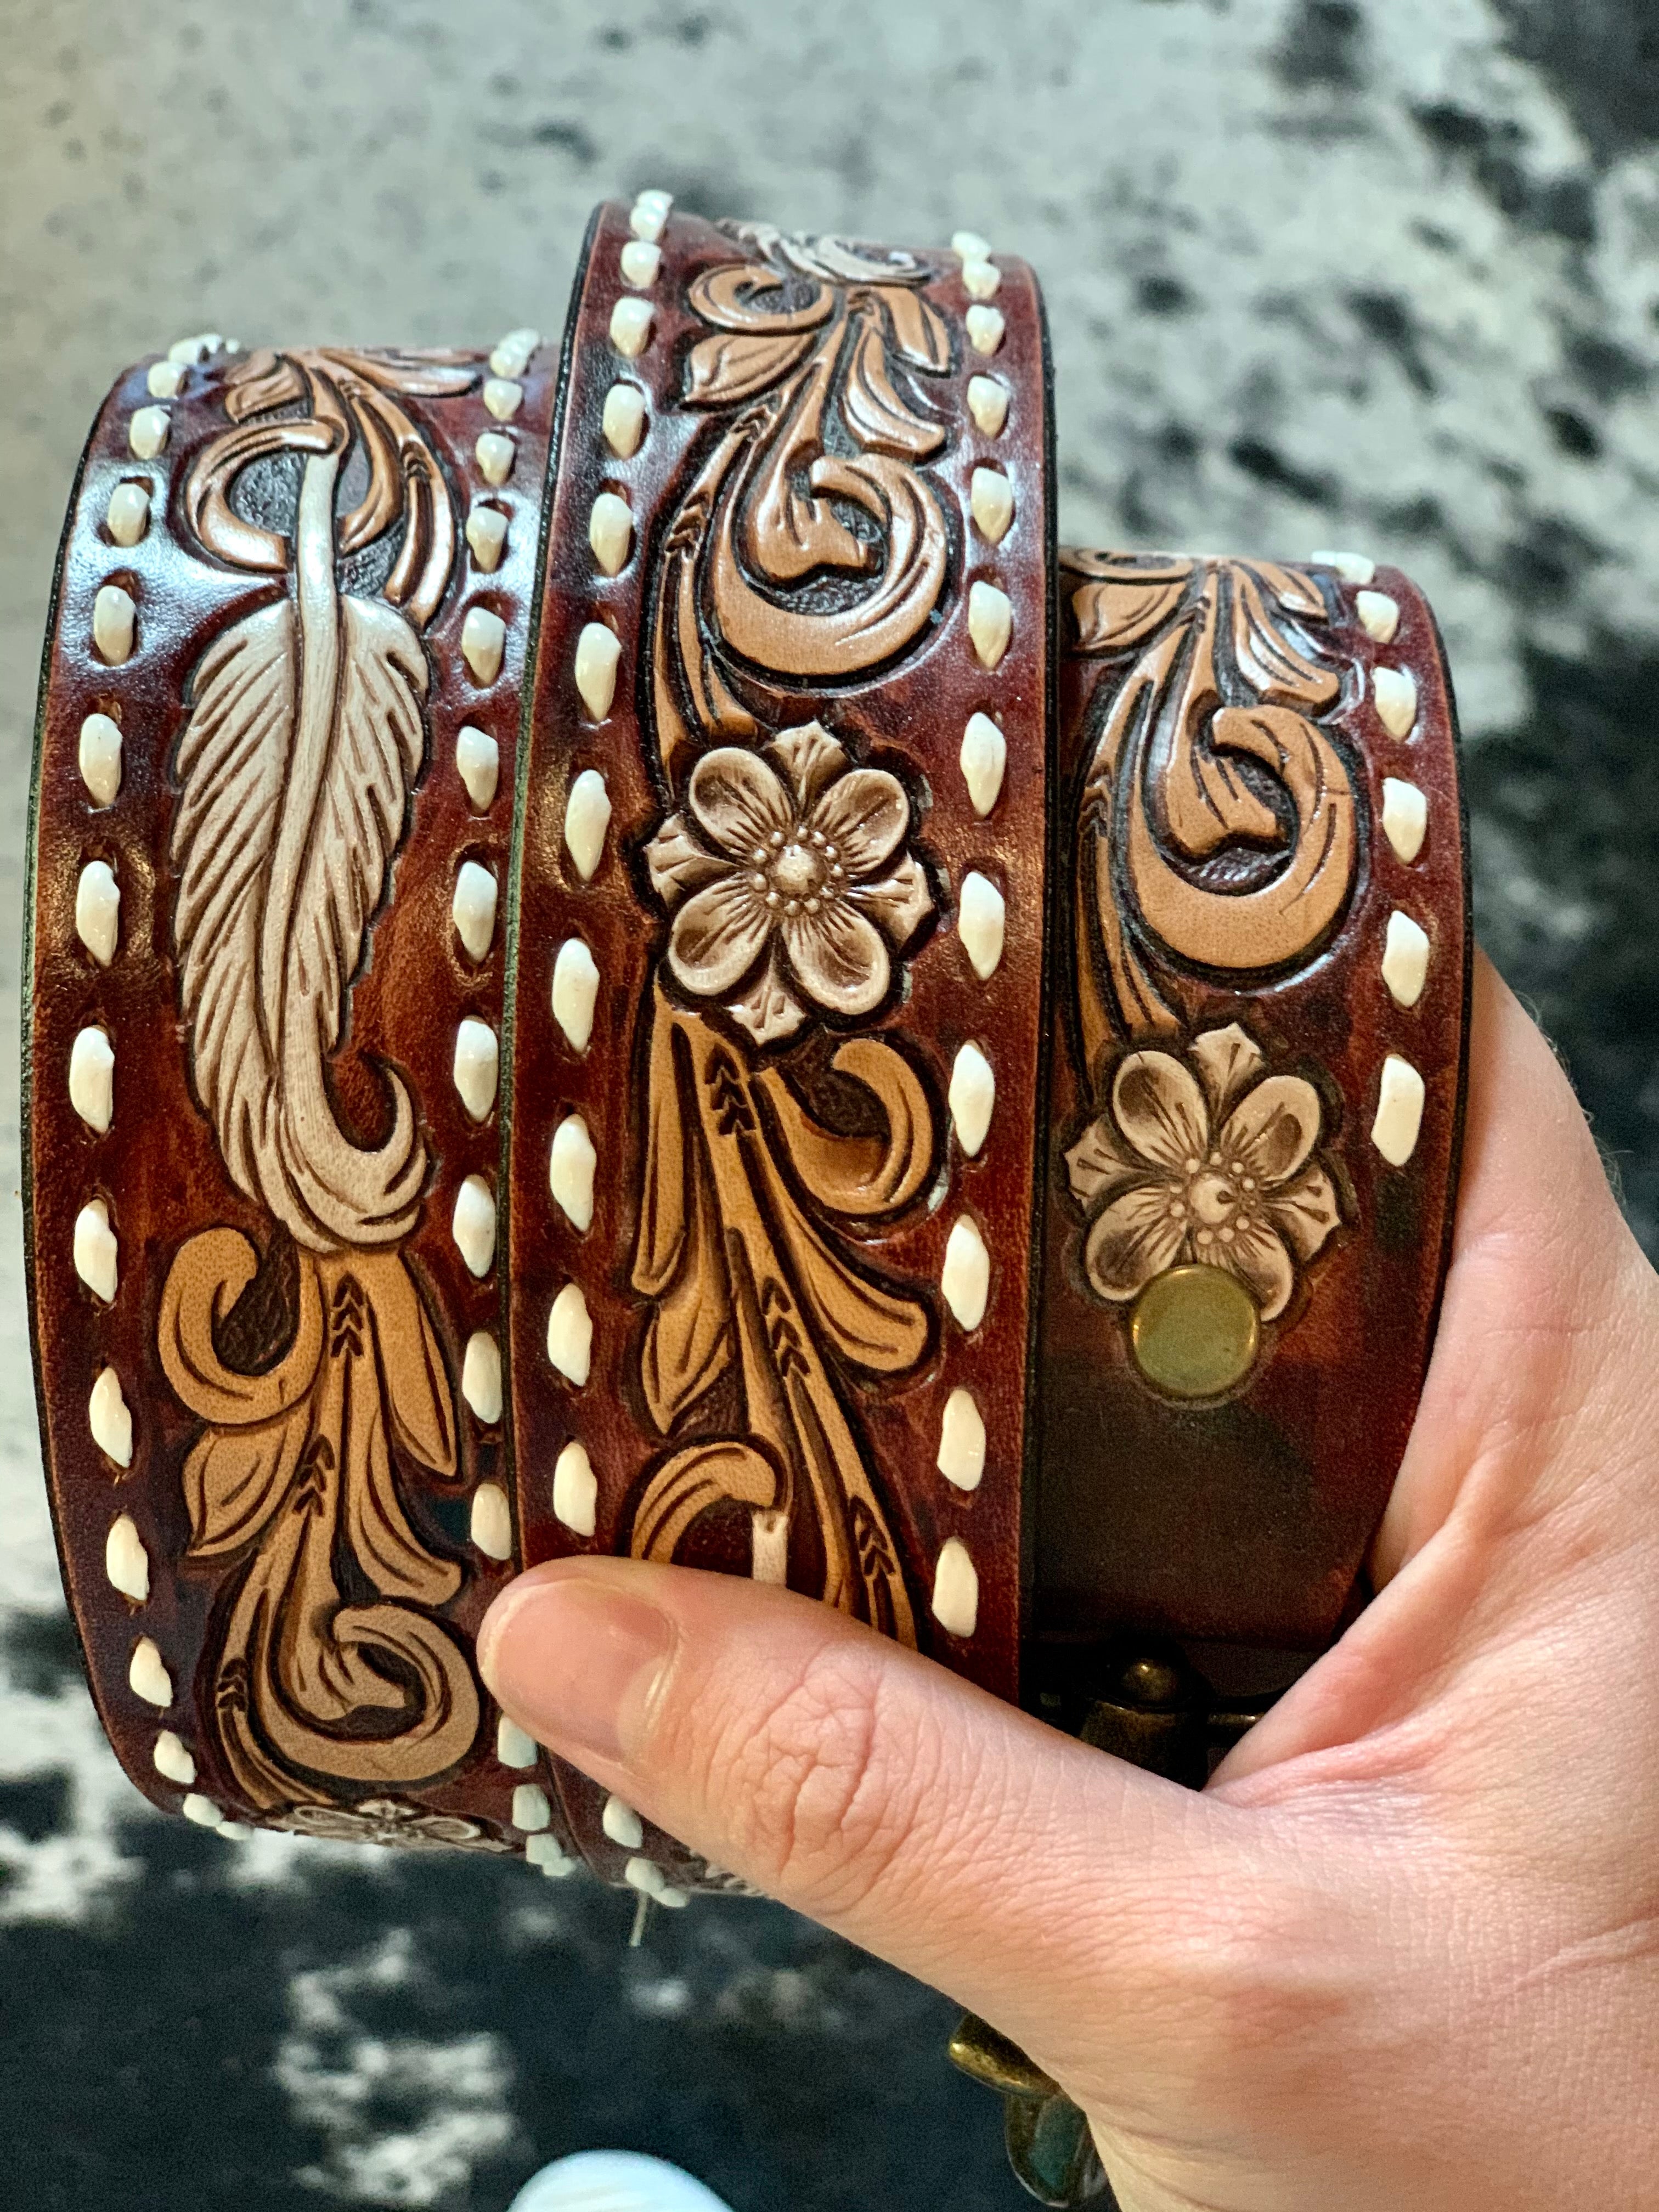 Tooled Leather Purse Straps – Rowdy Western Hippie